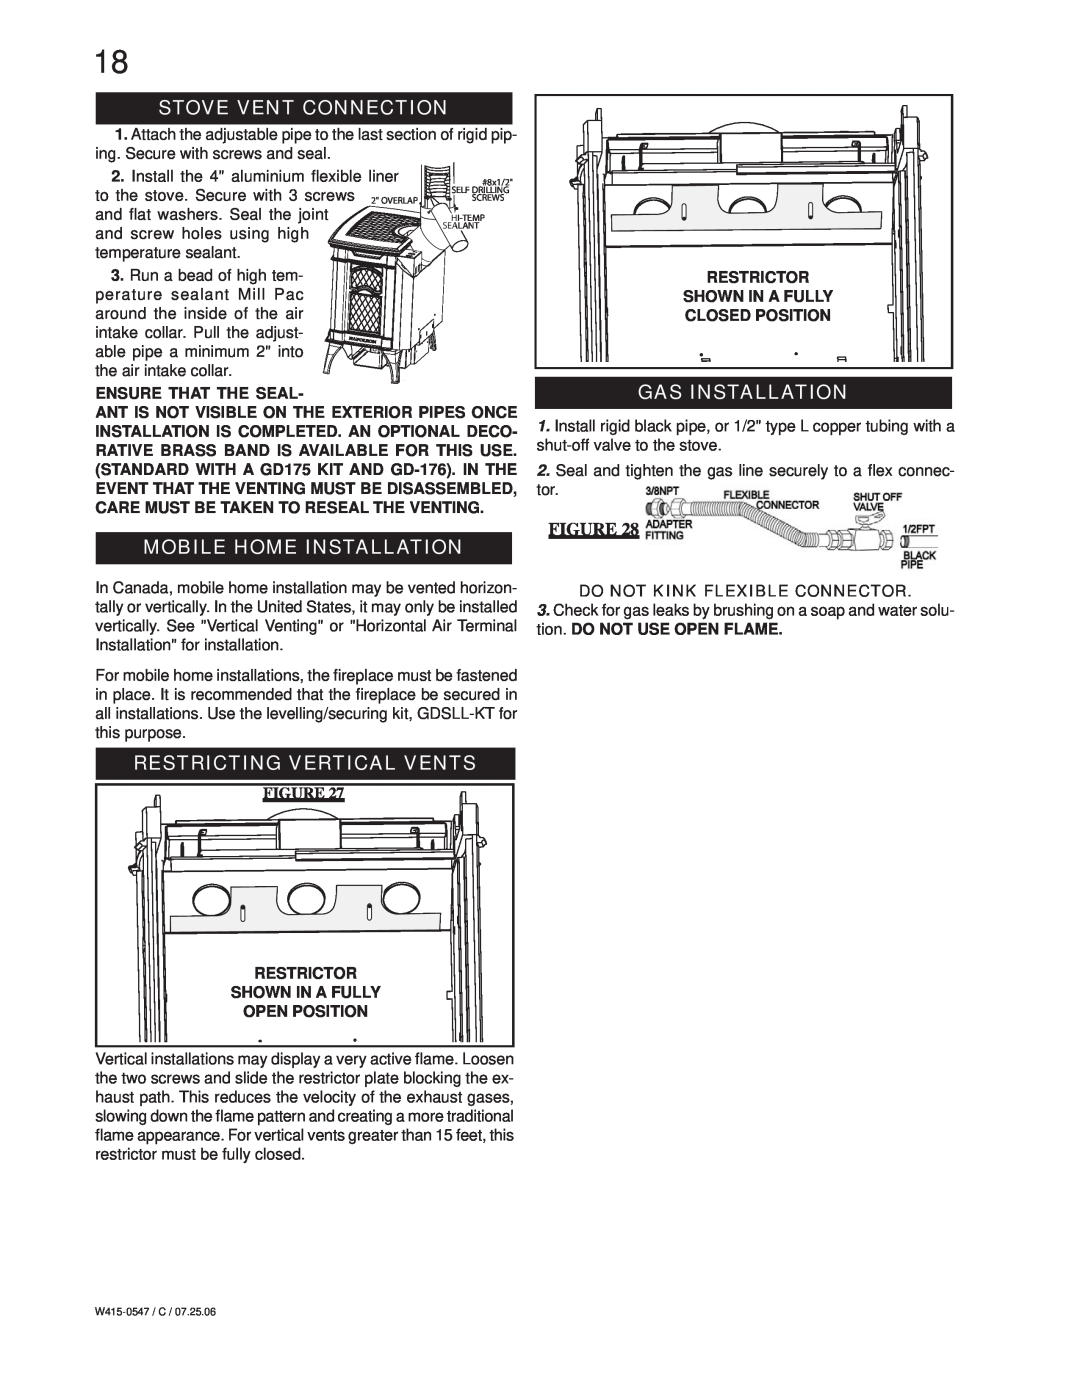 Napoleon Fireplaces GDS25N Stove Vent Connection, Mobile Home Installation, Restricting Vertical Vents, Gas Installation 